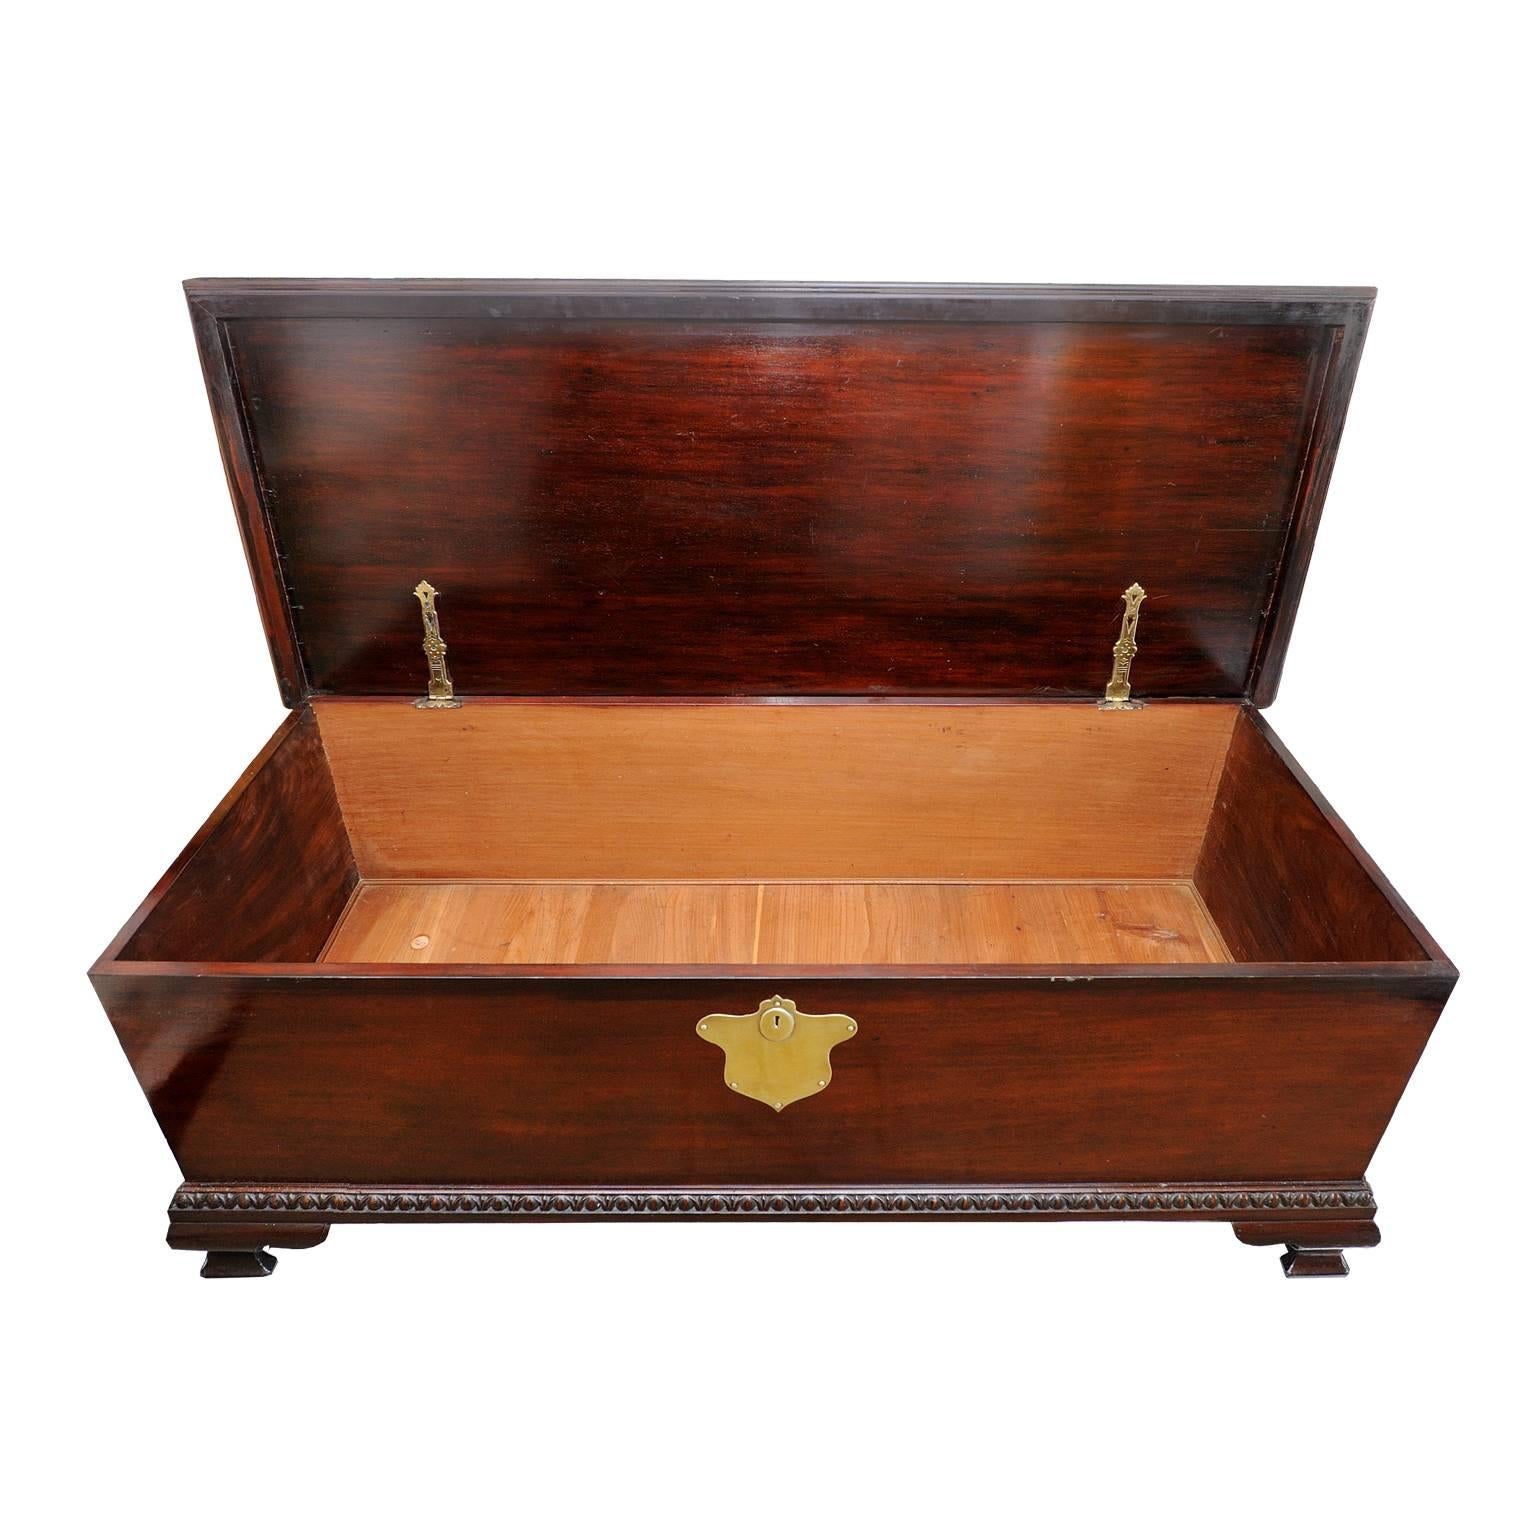 This is a beautifully propositioned large Irish 18th century mahogany blanket box with very attractive edge detailing and ogee bracket feet, complete with smart brass fittings and handles, circa 1780.
  